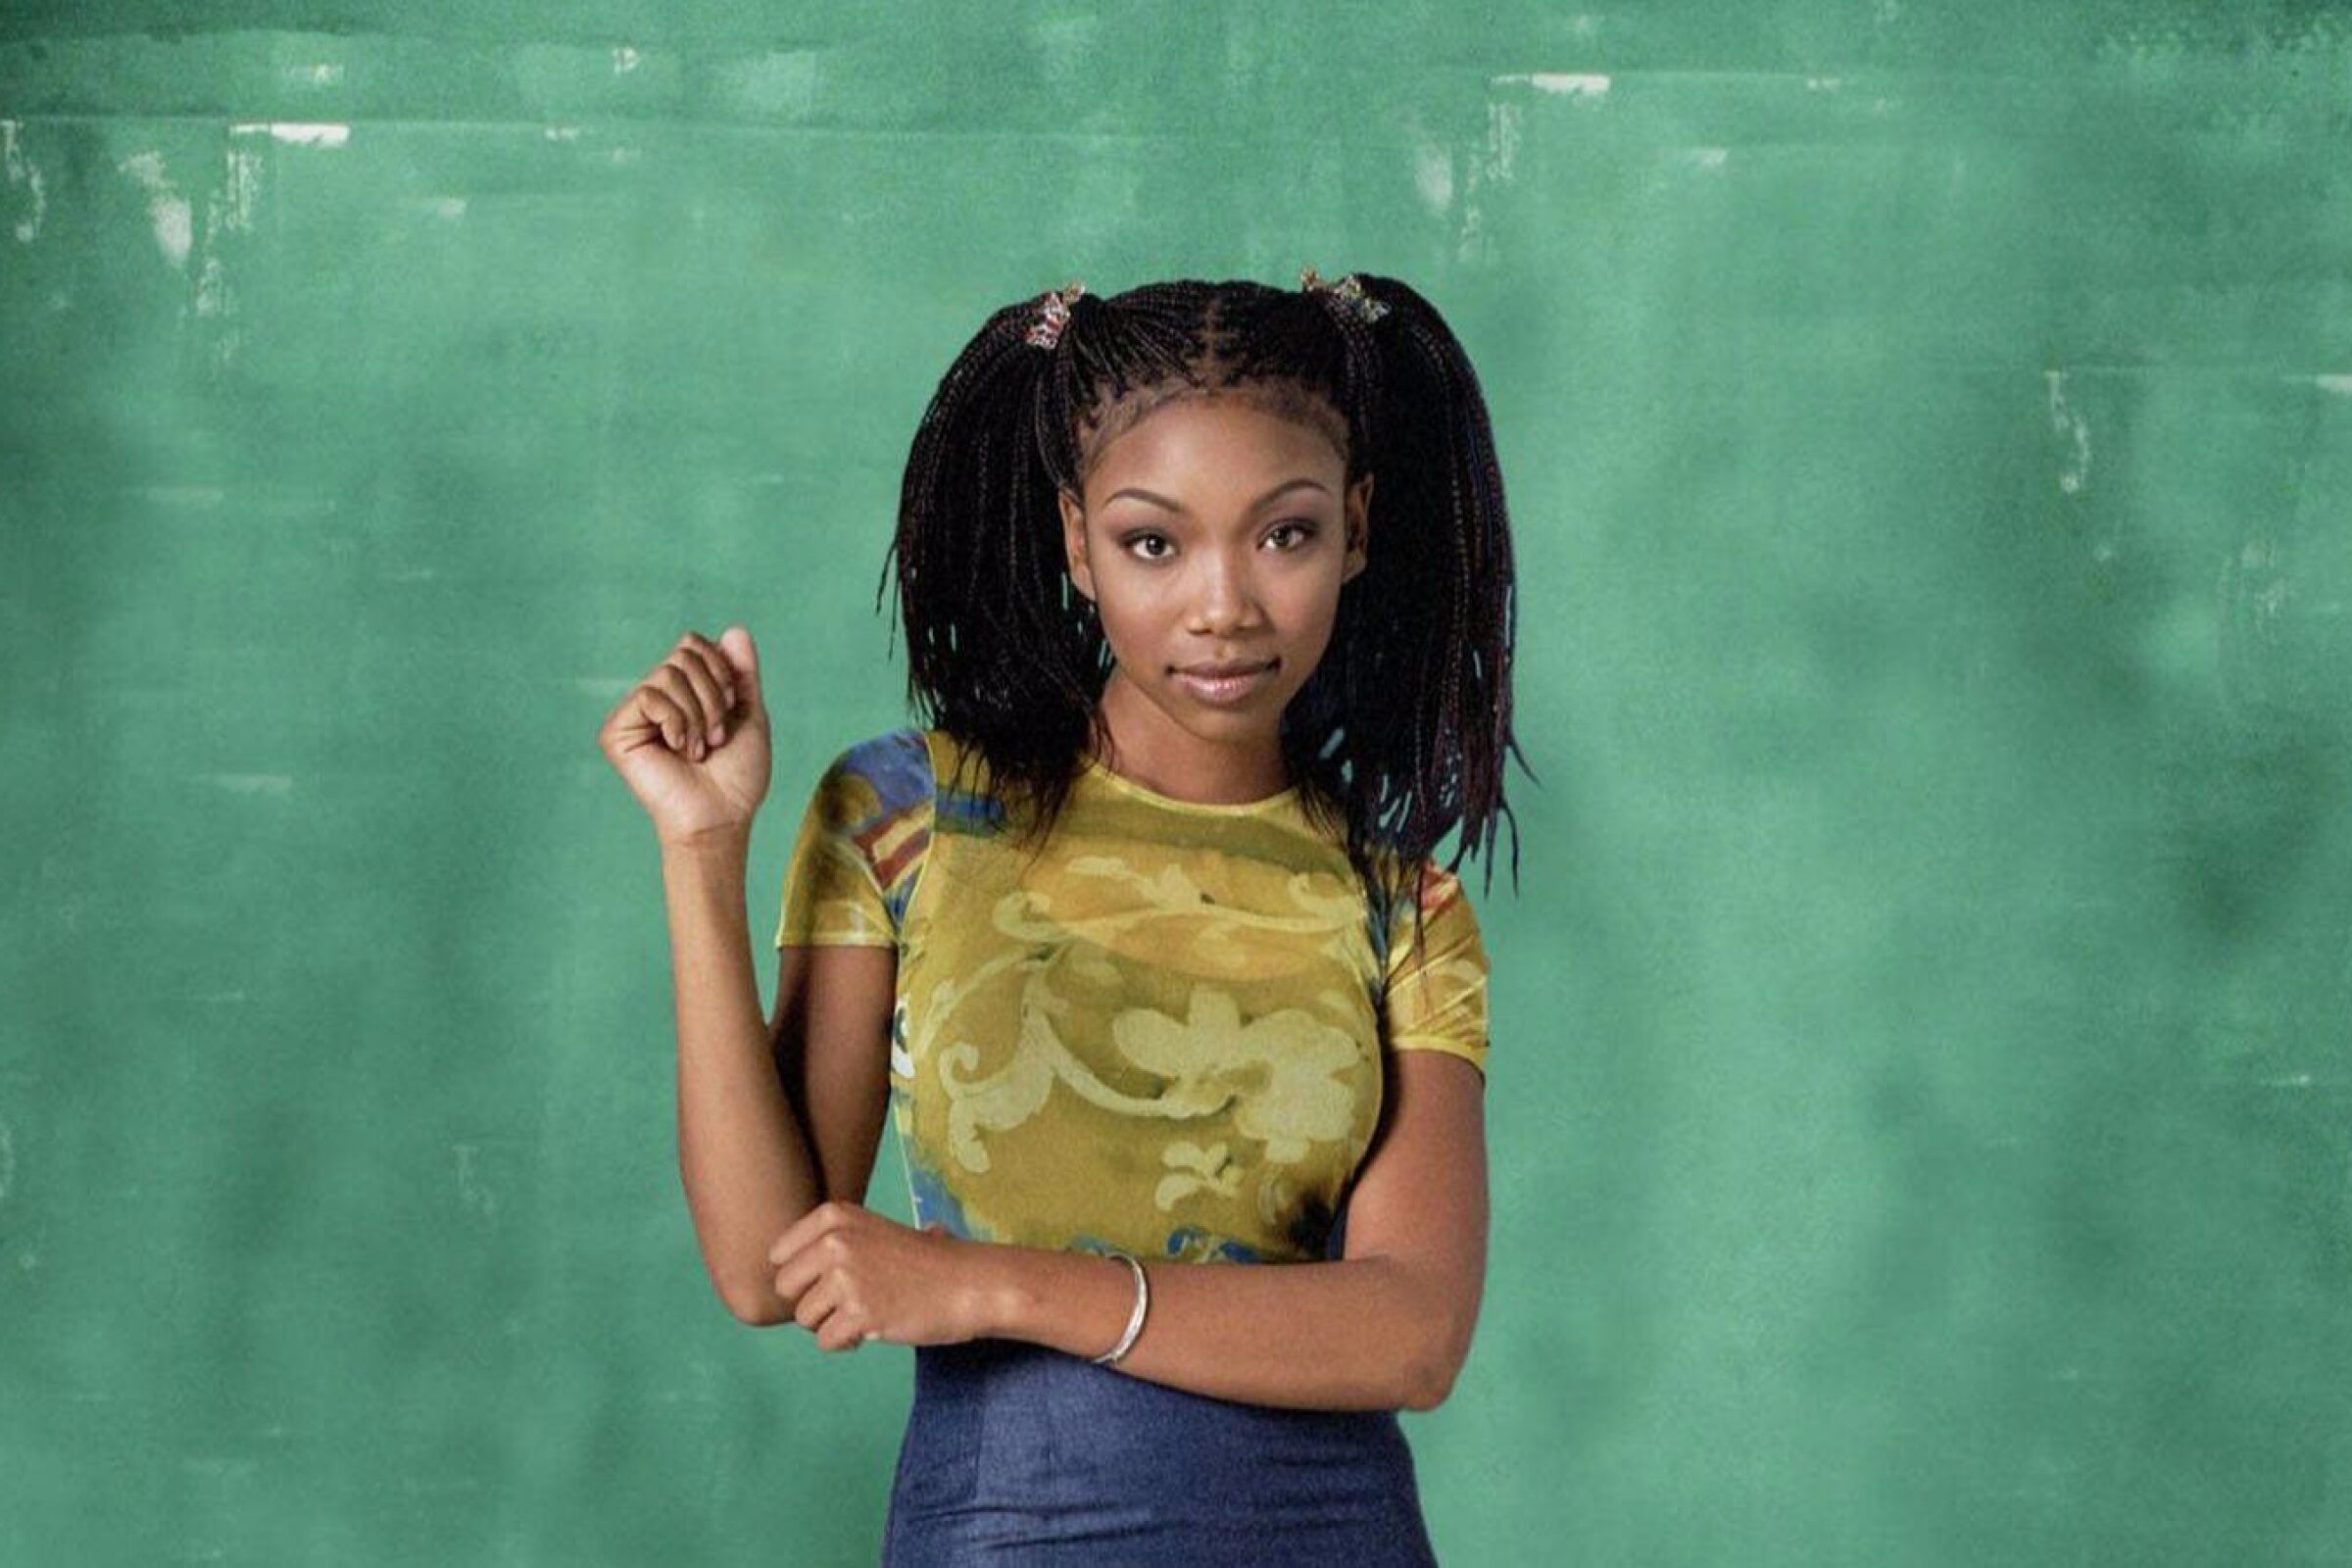 The peak of pop star Brandy's 1990s success included her own sitcom, "Moesha," now streaming on Netflix.